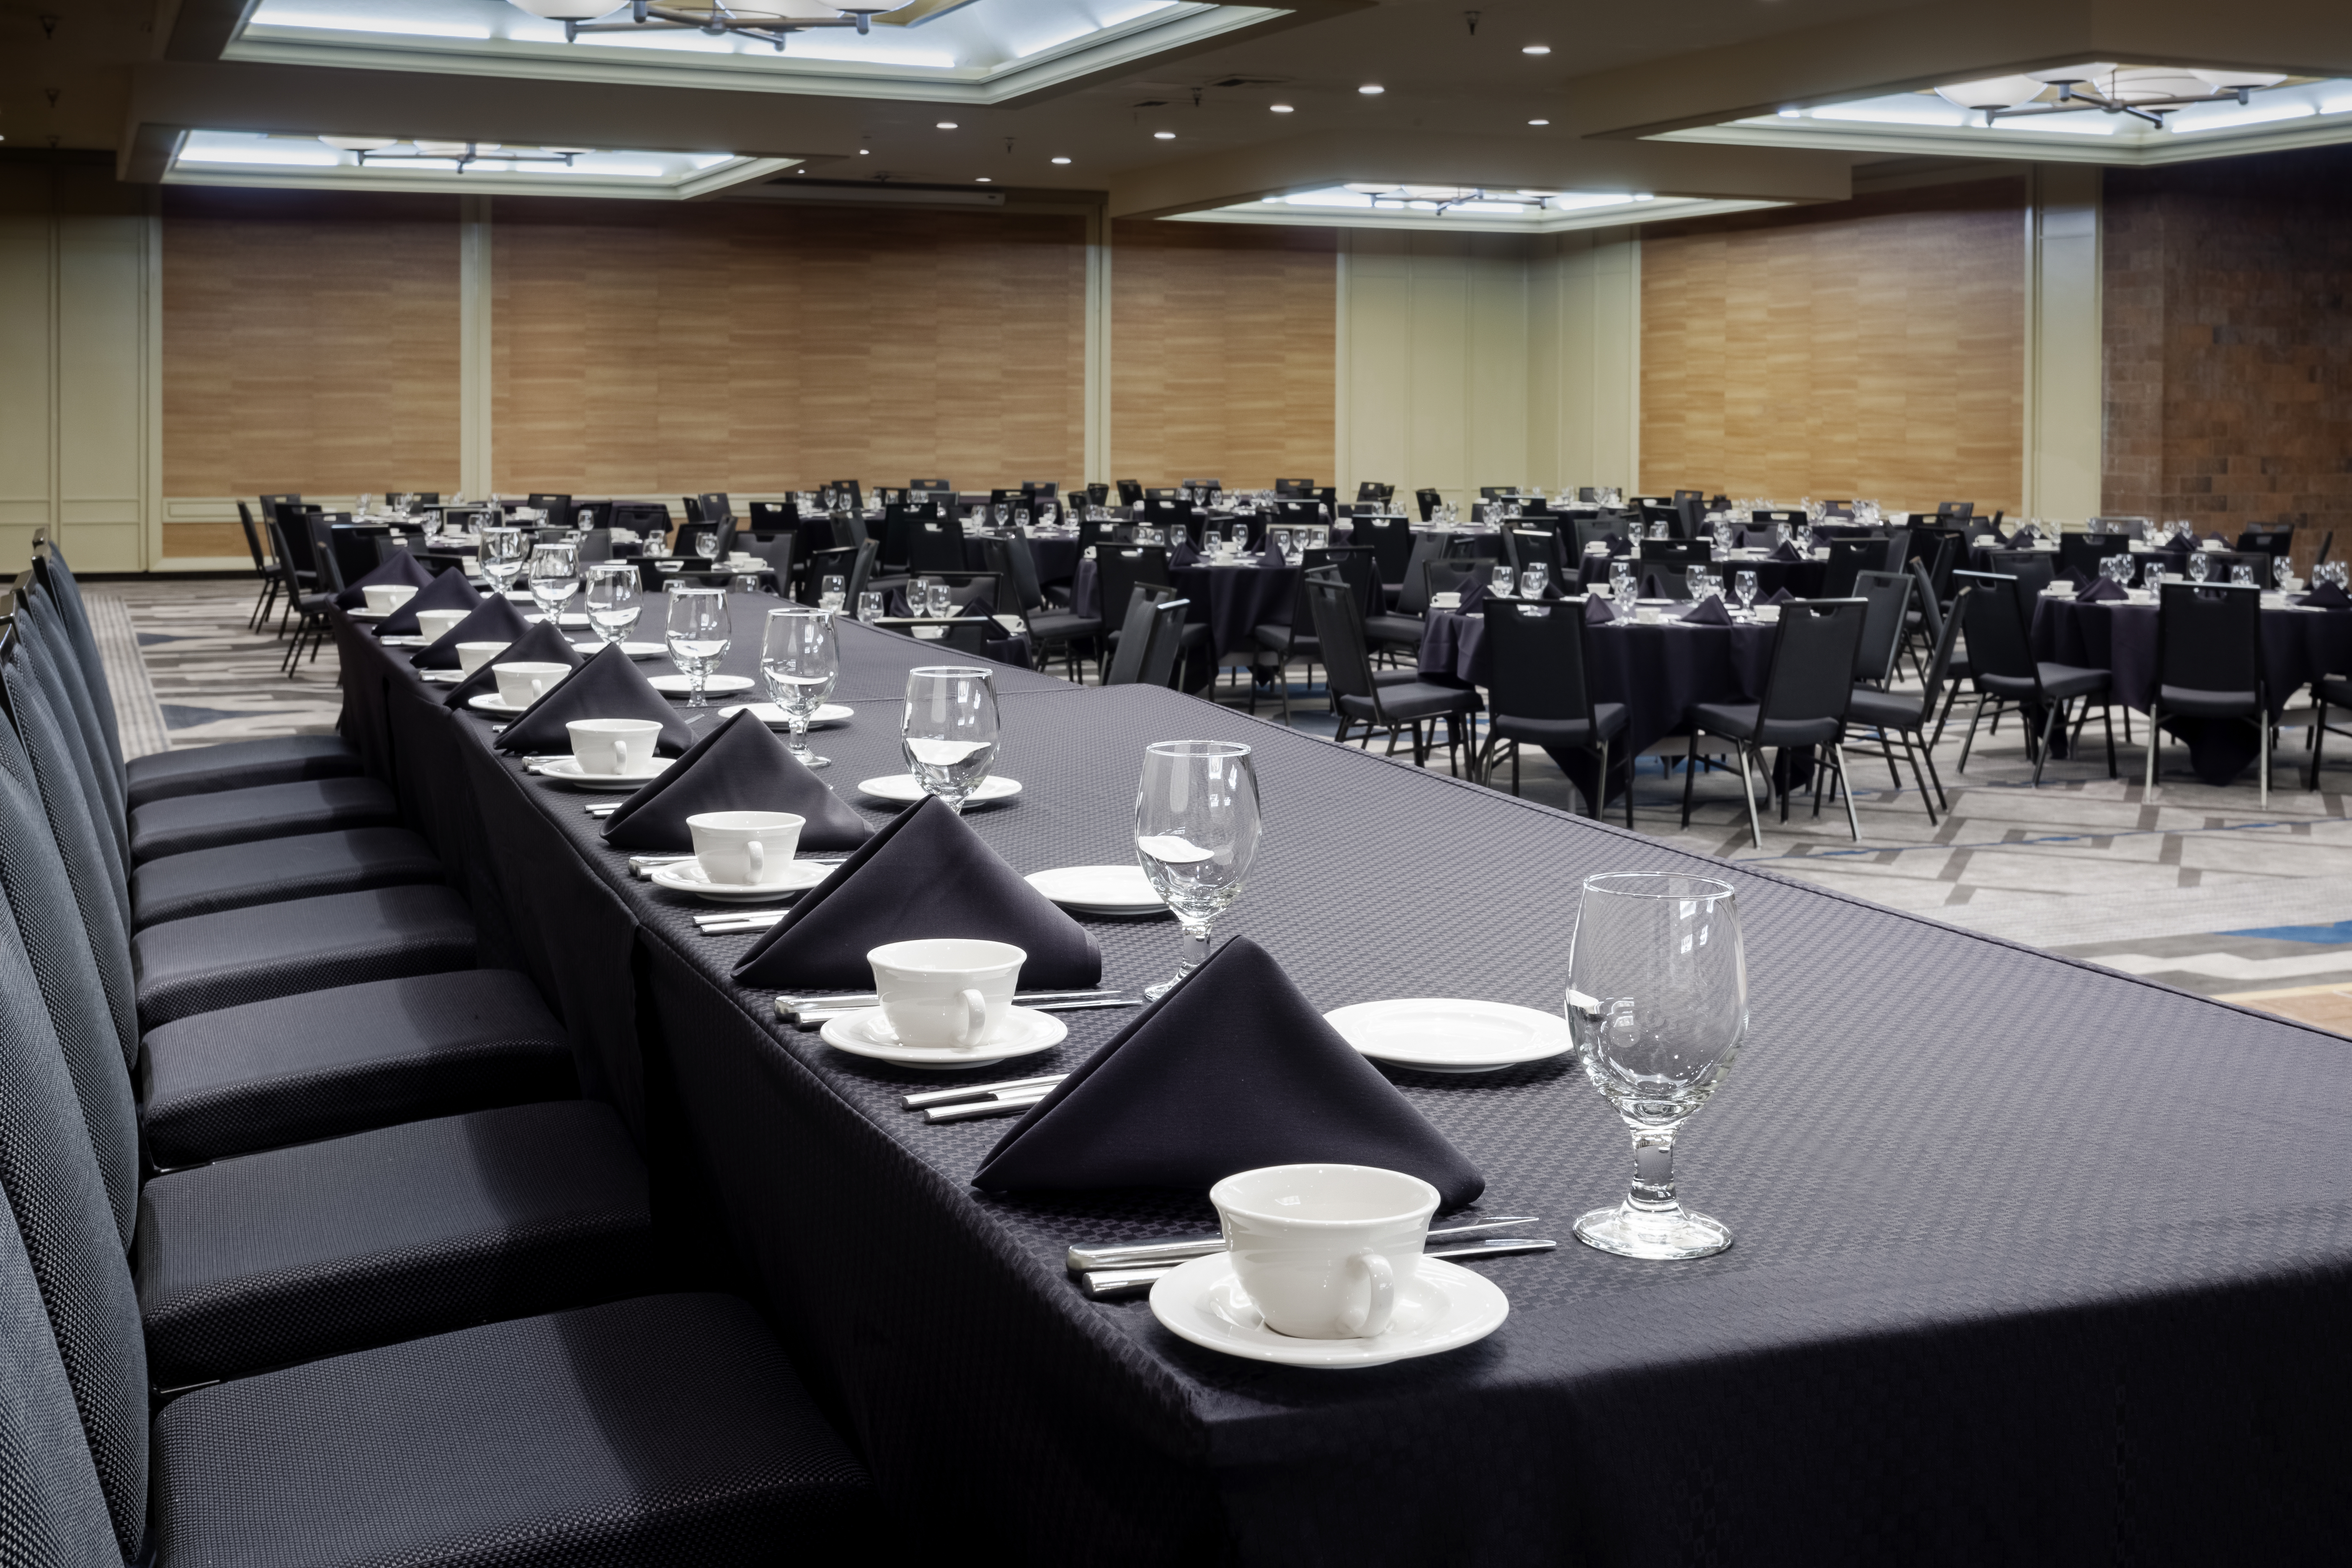 Detailed View of Place Settings on Conference Panel Table With Black Cloths and Round Tables in the Background